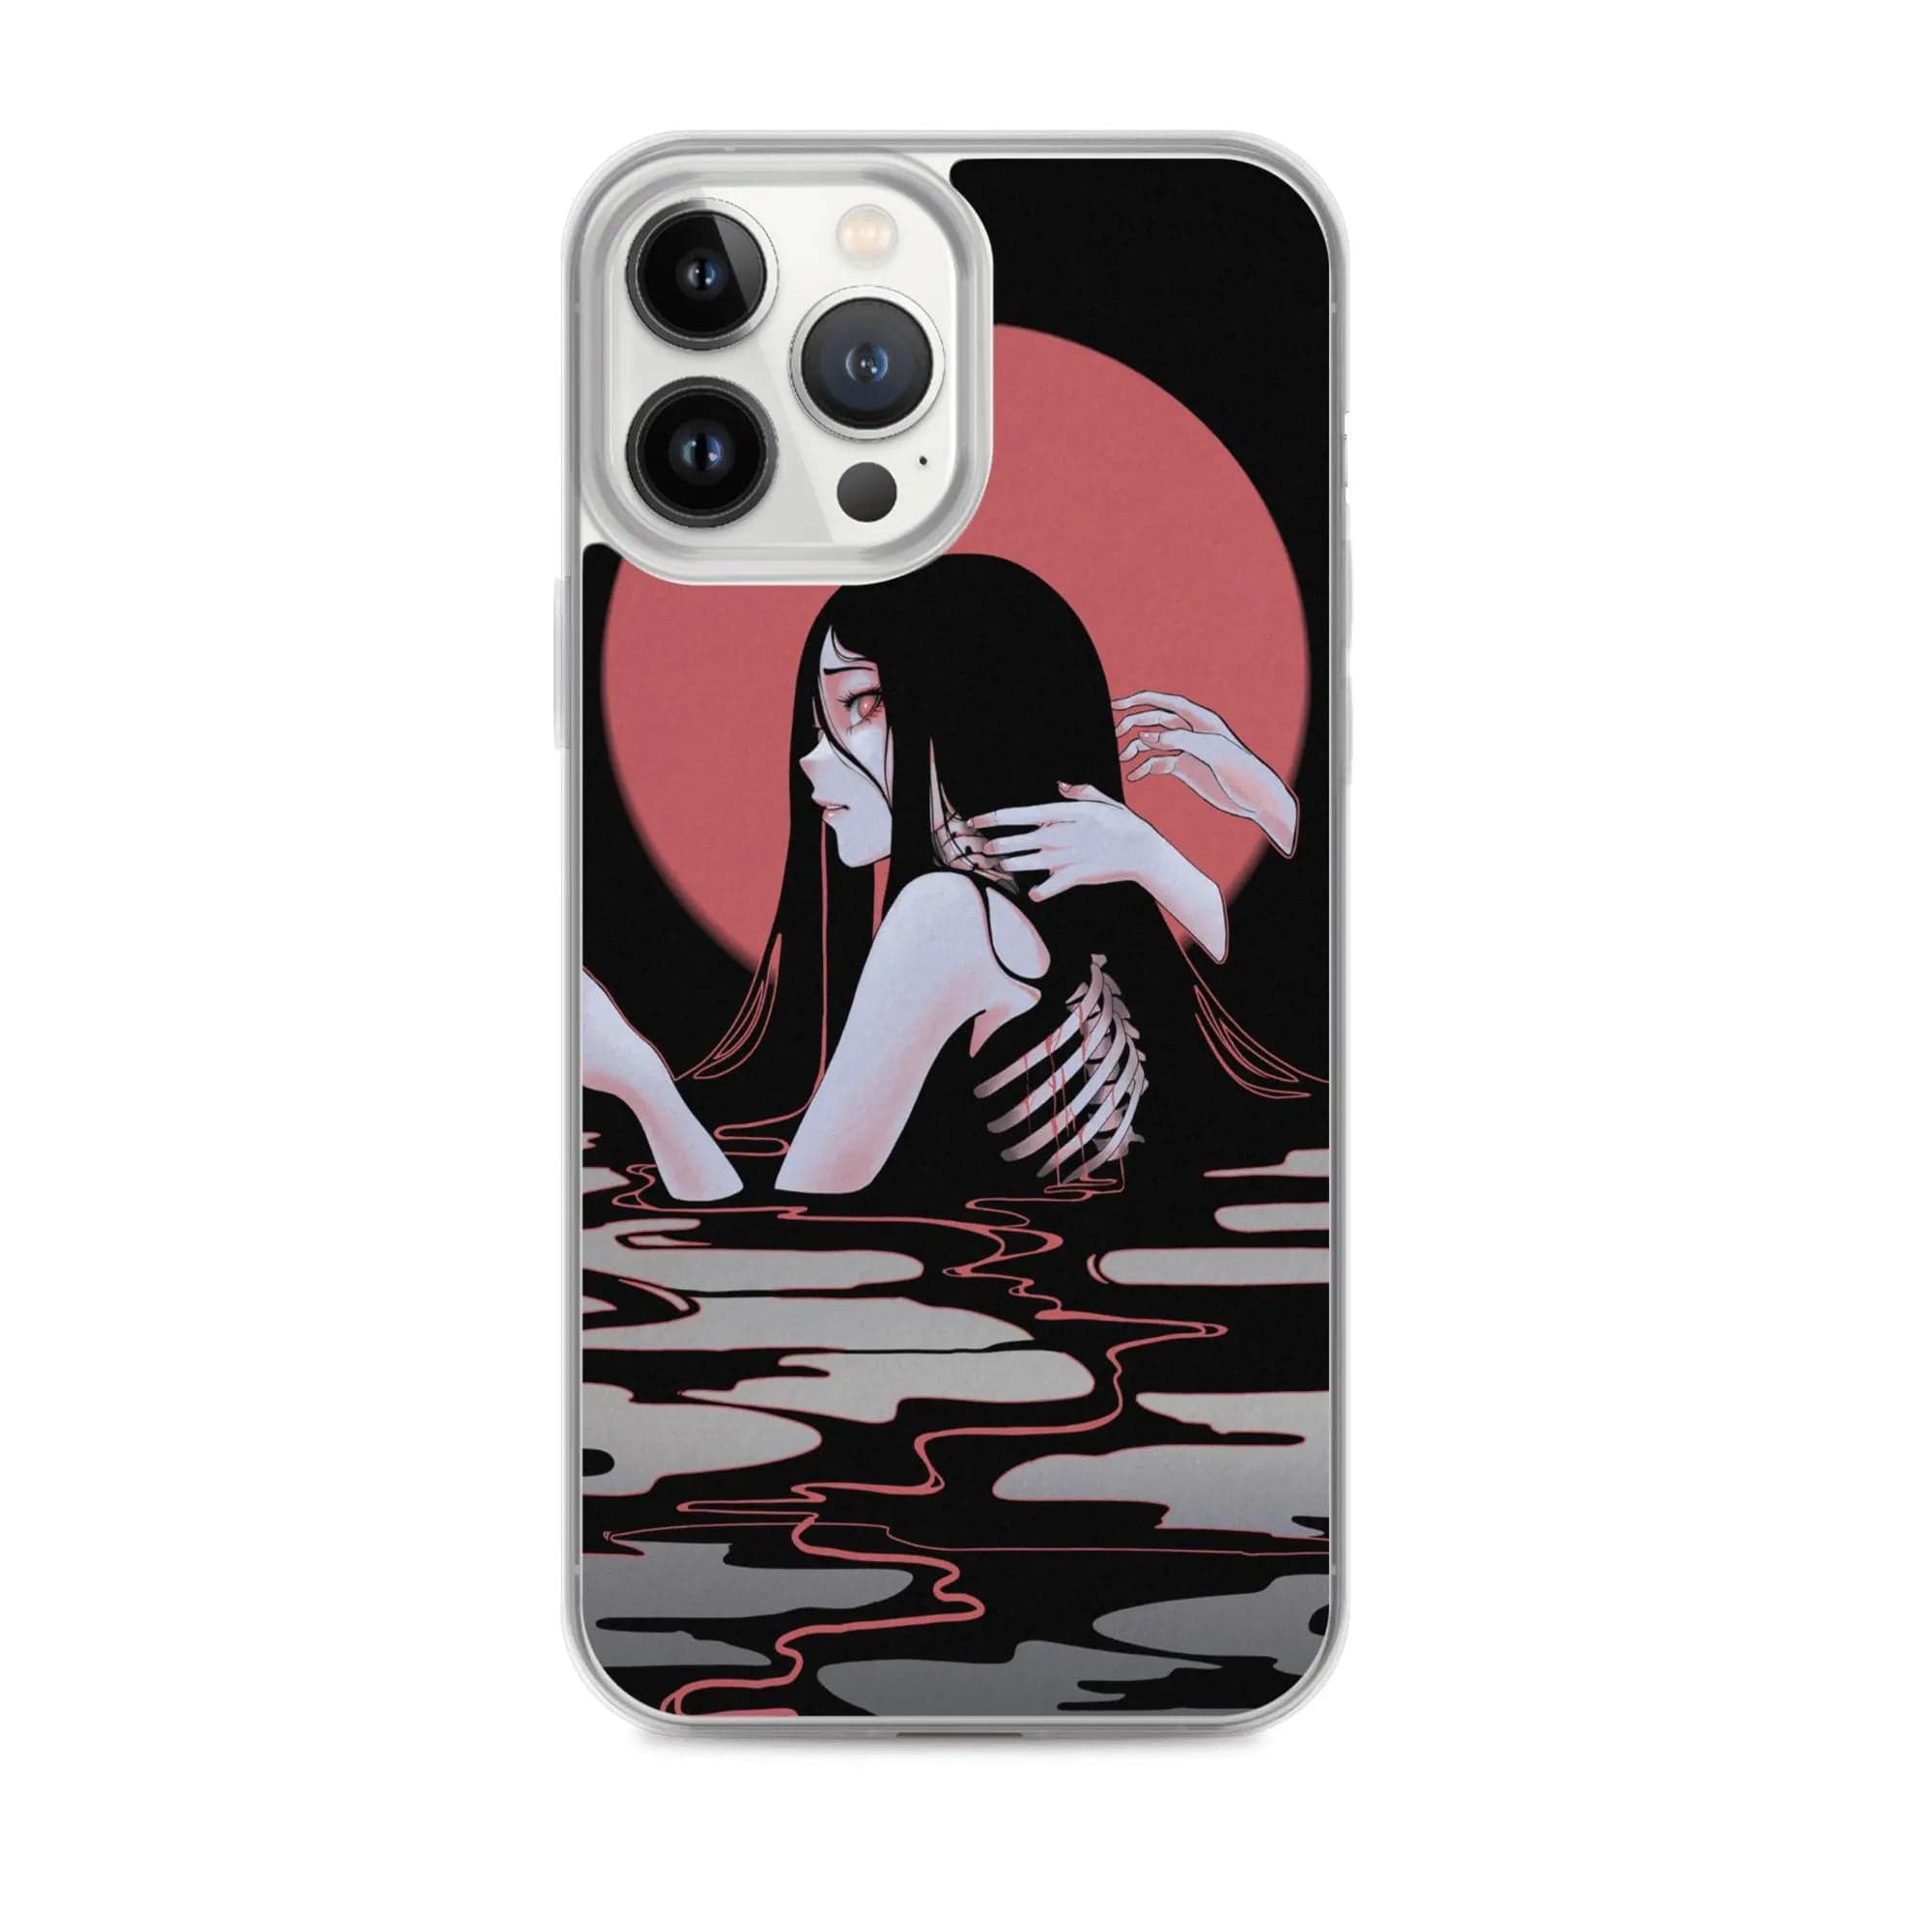 iphone-case-iphone-13-pro-max-case-on-phone-6320a6179e721-10283955.jpg